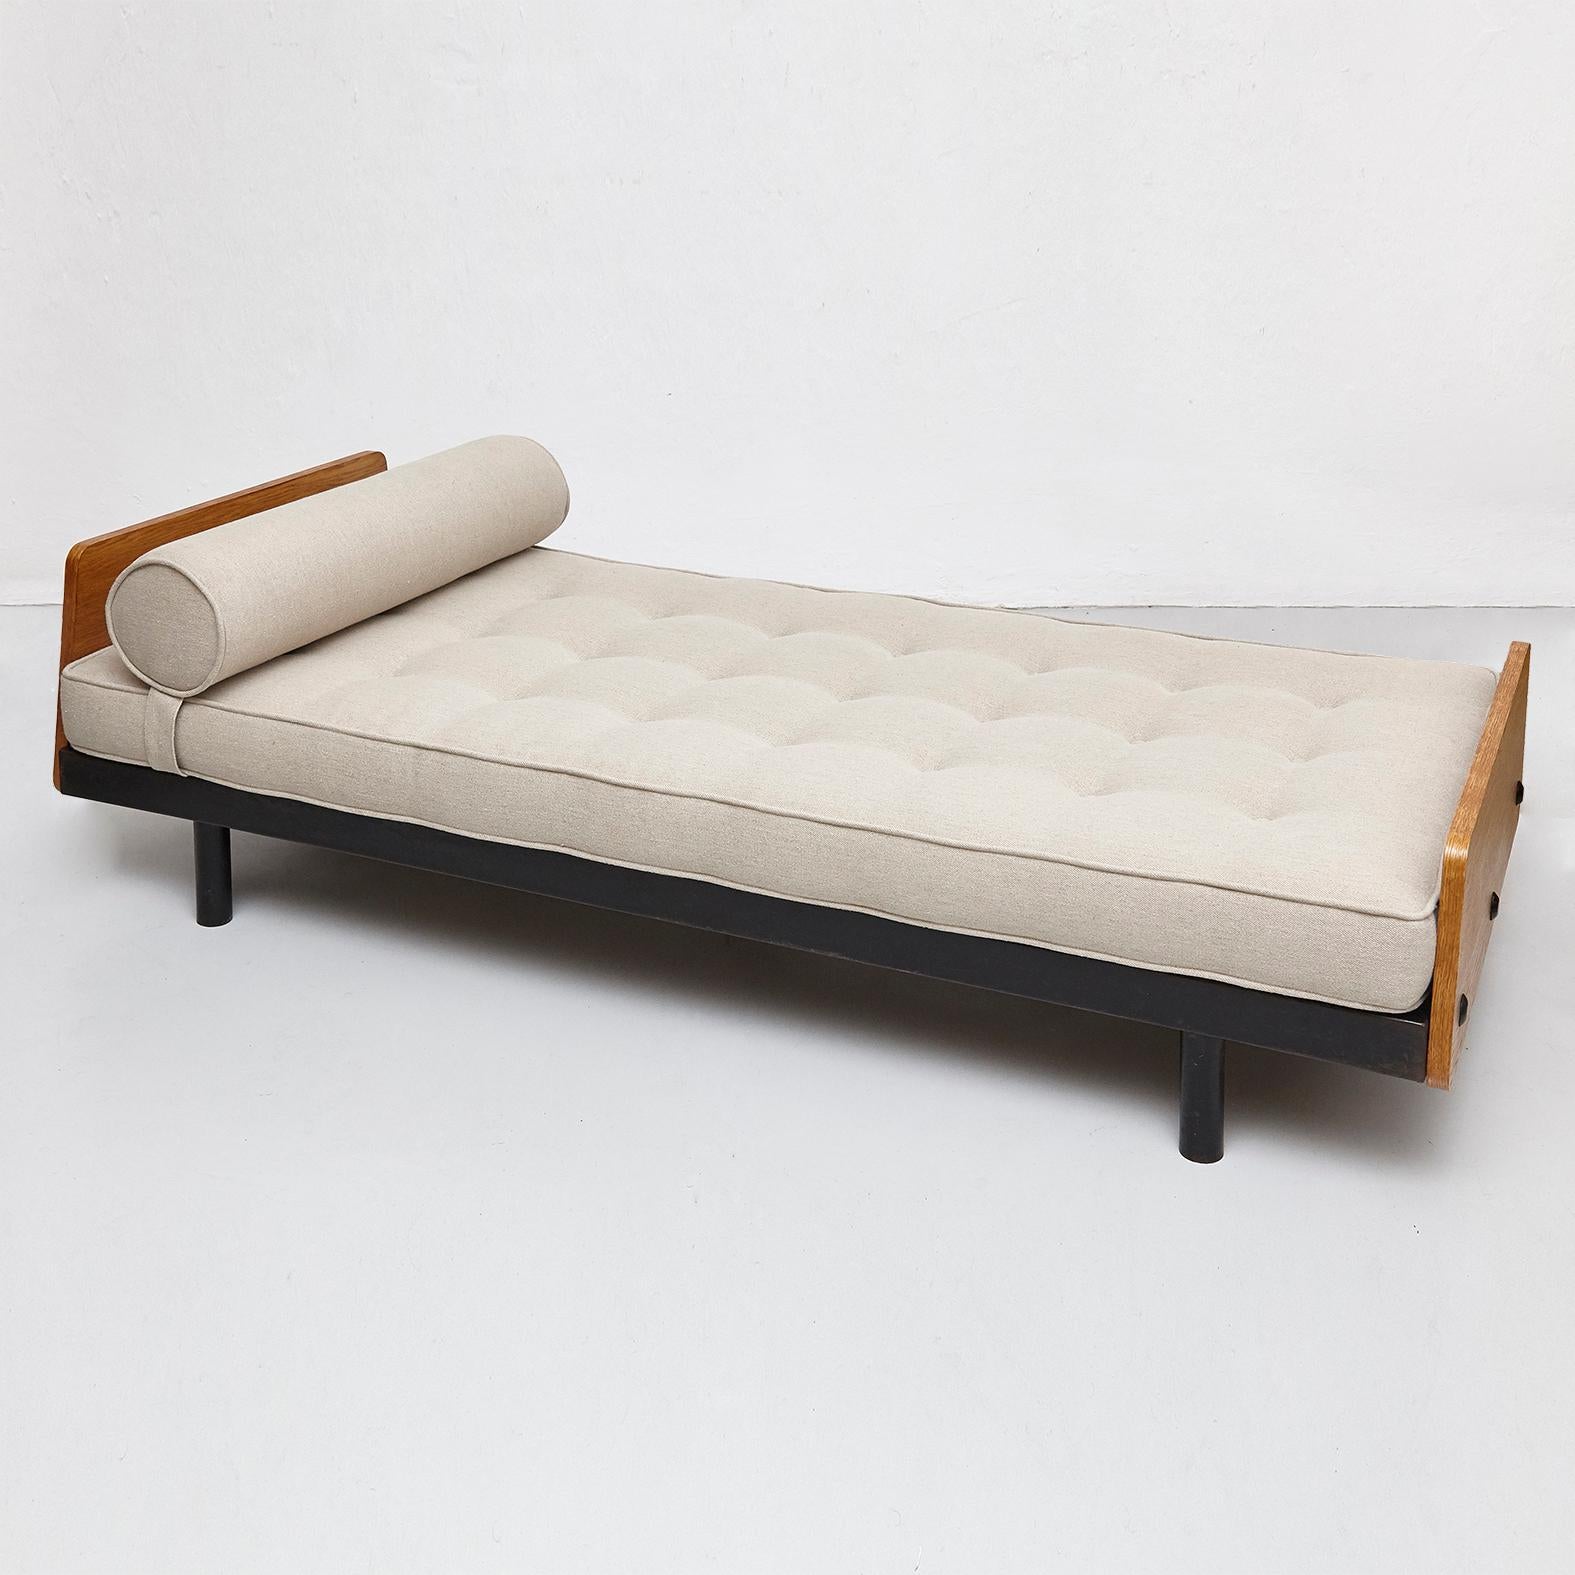 Daybed designed by Jean Prouve manufactured by Ateliers Prouve (France), circa 1950.

In original condition, with minor wear consistent with age and use, preserving a beautiful patina.
It has some traces of rust and the wood and metal has been